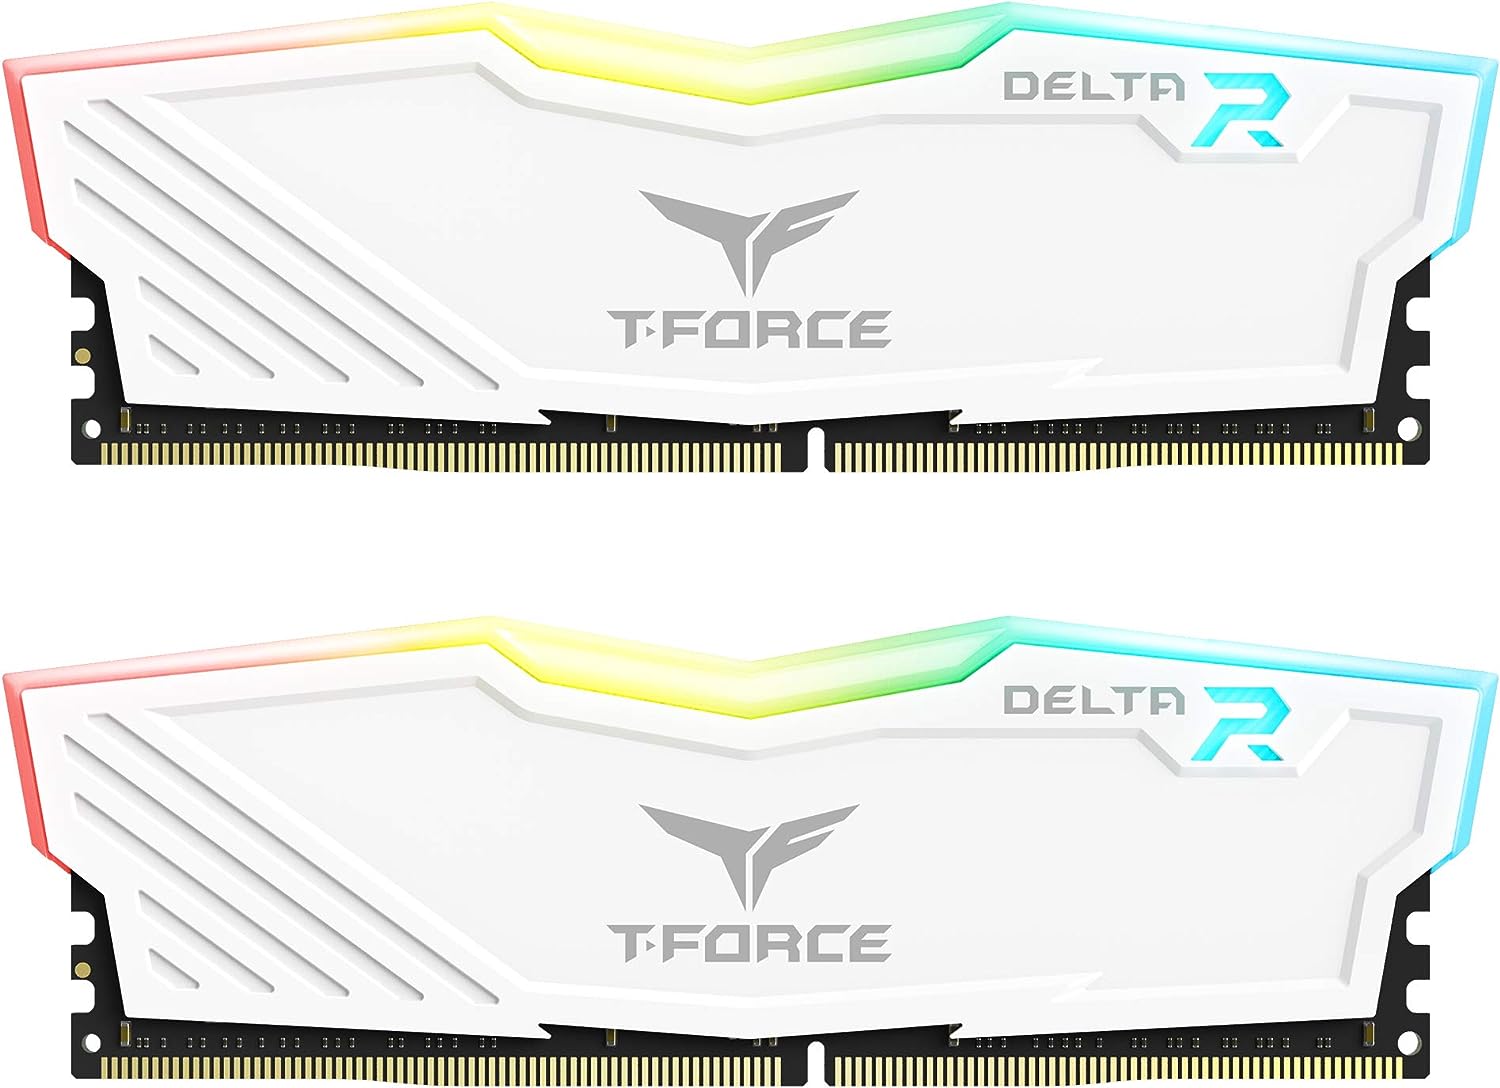 Team T-Force Delta RGB DDR4 Gaming Memory, White, 2 x 8 GB, 3600 Mhz, 288 Pin DIMM 0765441651760